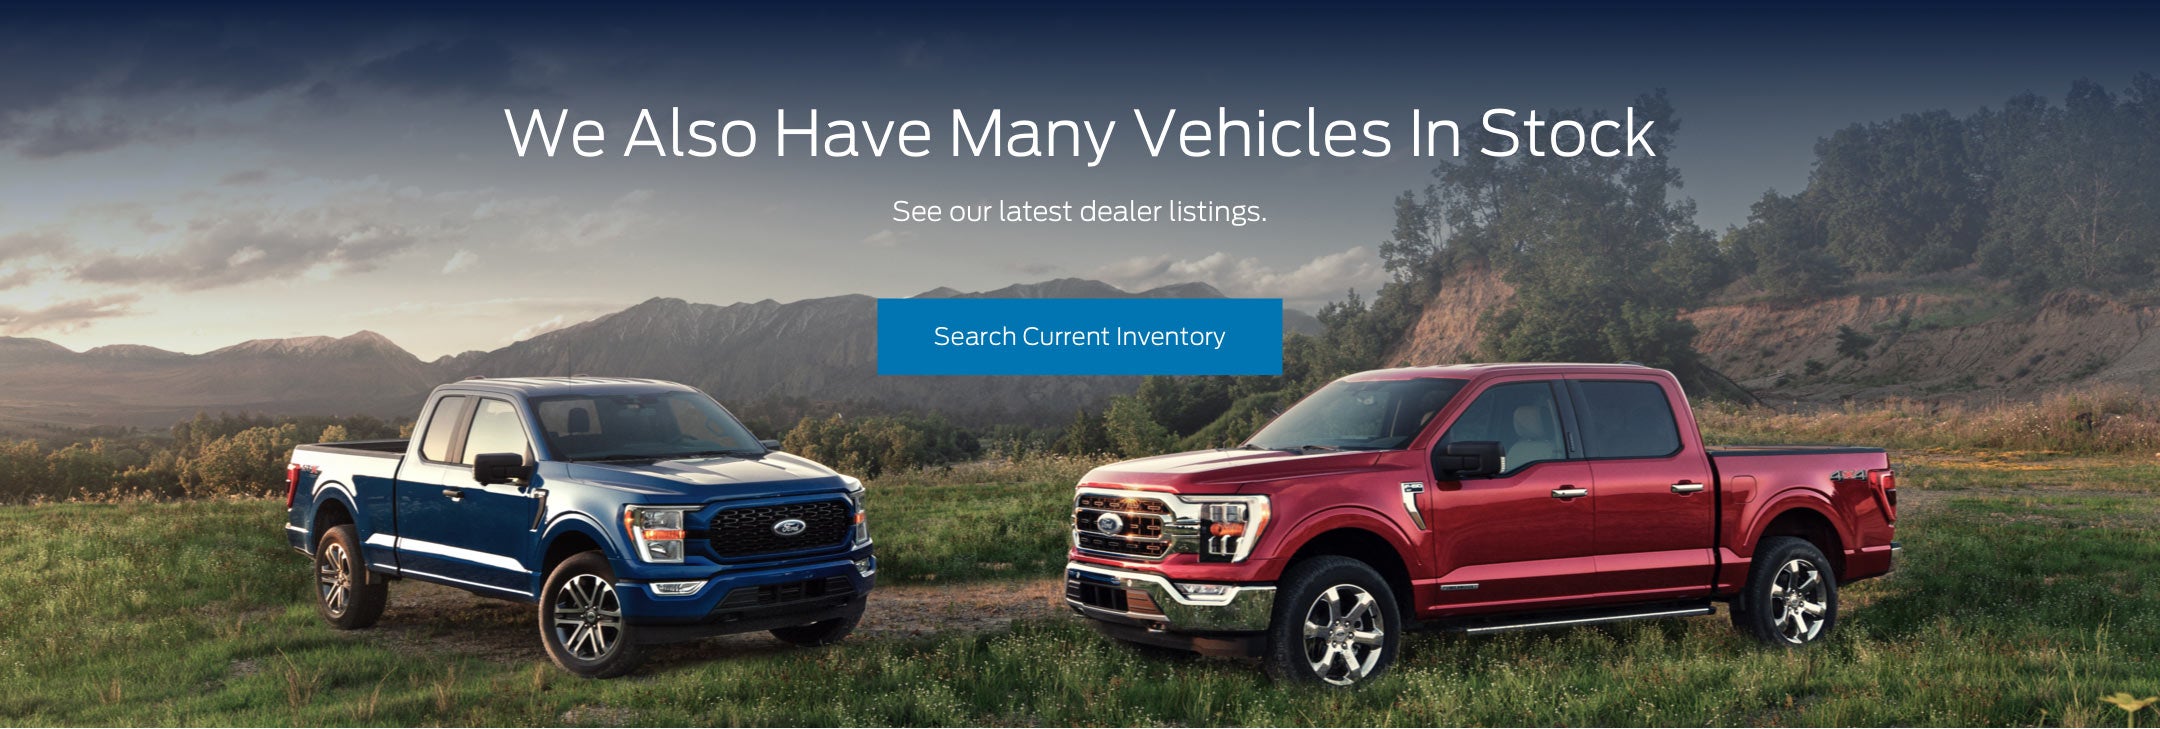 Ford vehicles in stock | Franklin Ford, Inc. in Franklin NC